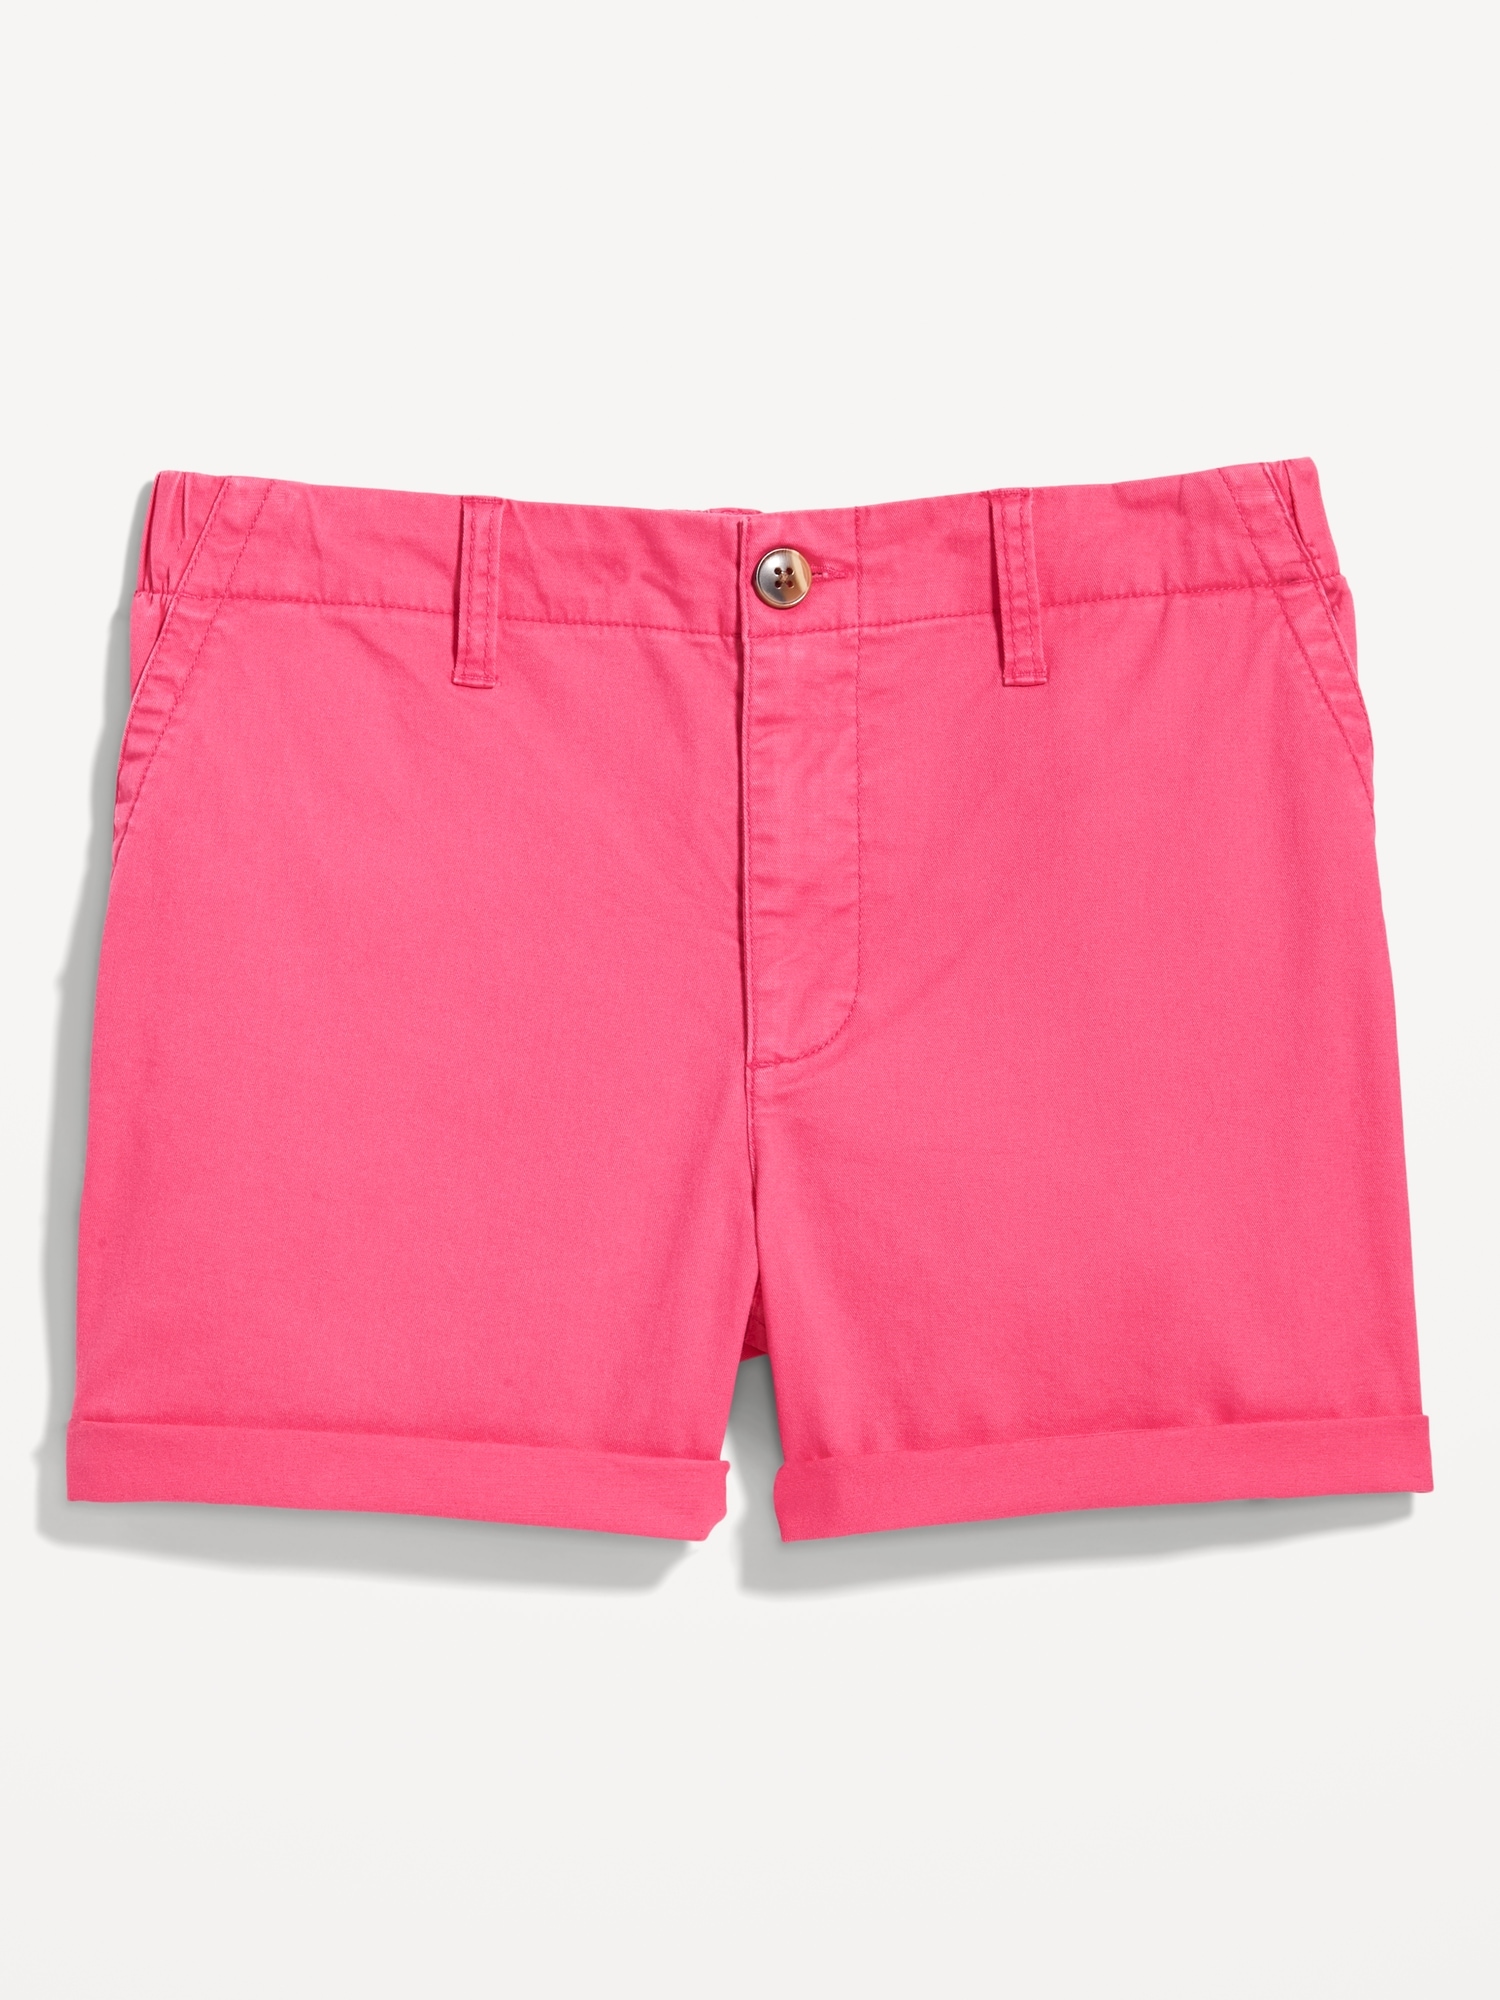 High-Waisted OGC Chino Shorts -- 3.5-inch inseam | Old Navy